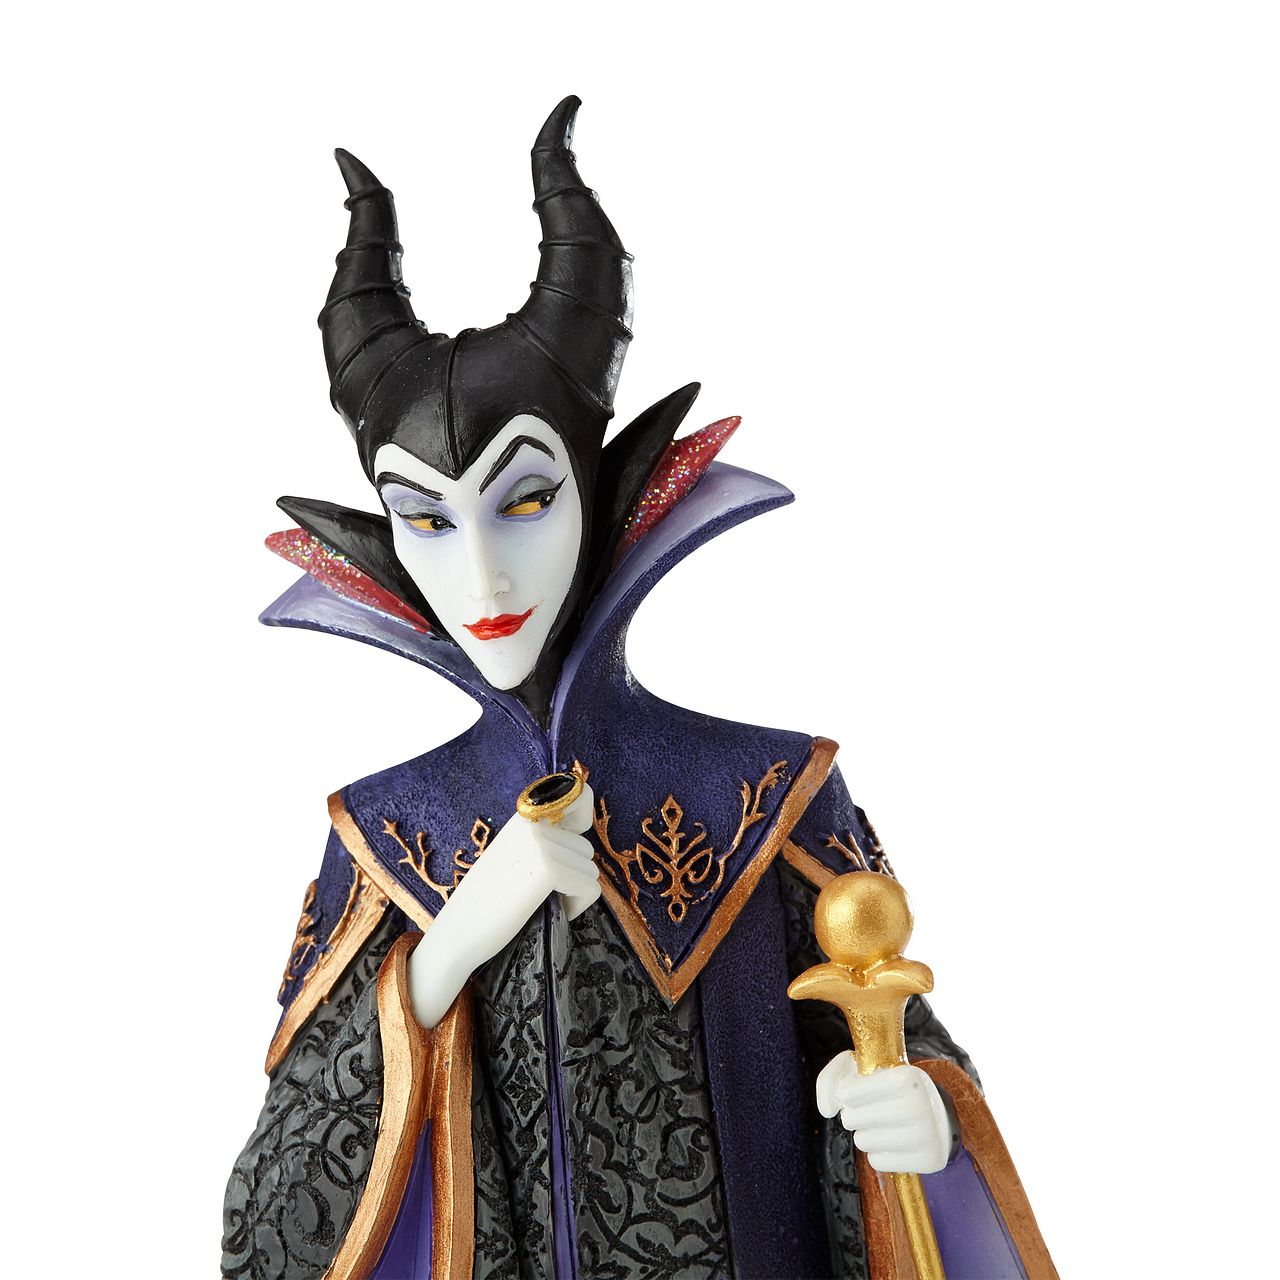 Disney Maleficent Figurine  Maleficent strikes a regal pose in this handcrafted design from the Haute Couture collection, her ominous onyx robes reimagined as a satin gown and feathered, floor-length cape. Ready to rule the runway, the fashionable figure holds a golden scepter.